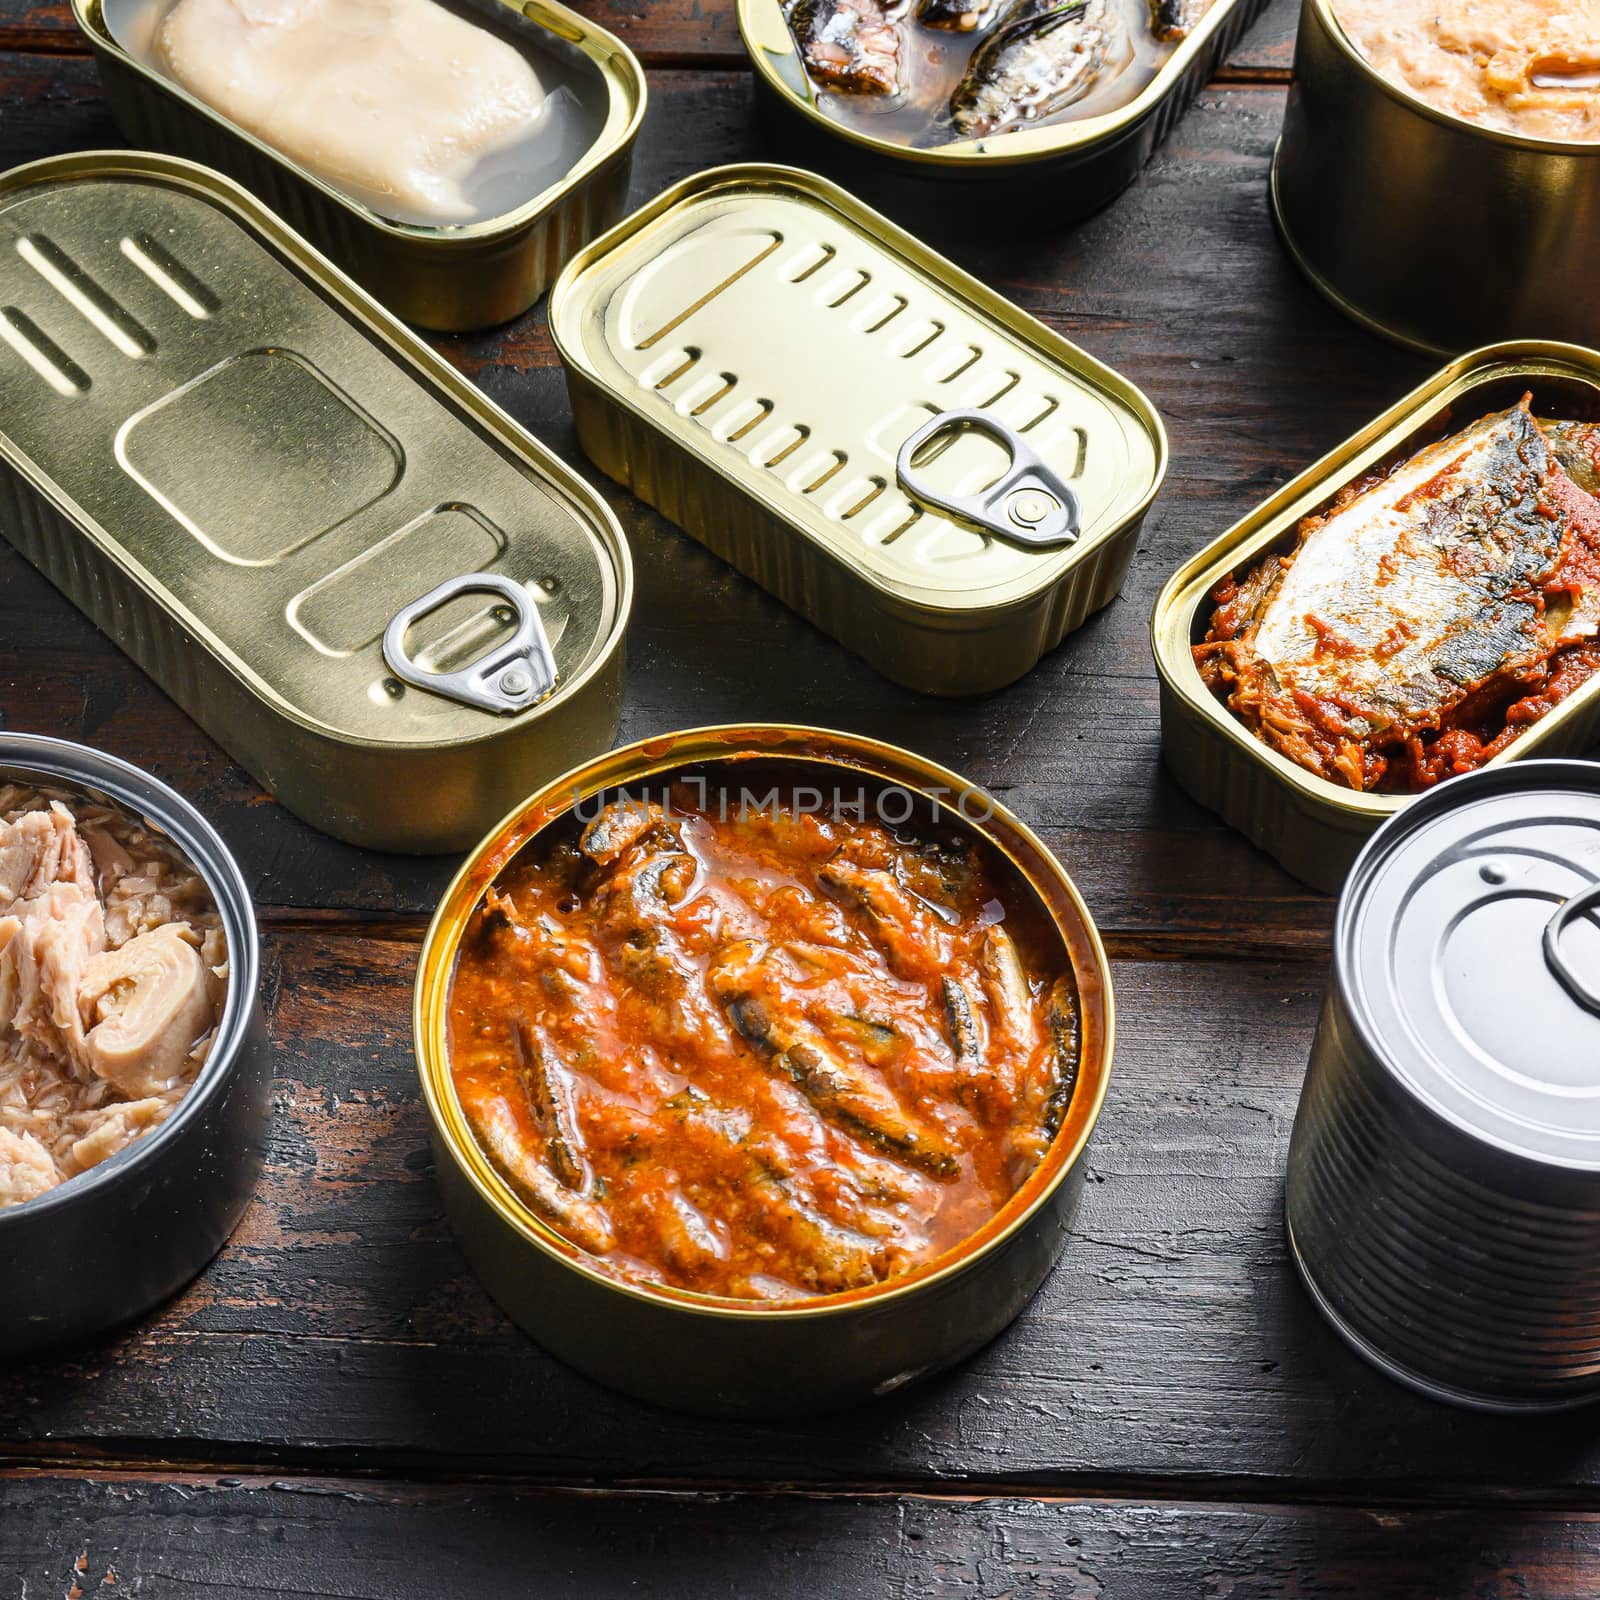 Conserves of canned fish with different types of seafood, opened and closed cans with Saury, mackerel, sprats, sardines, pilchard, squid, tuna, over dark wood old table side view, square by Ilianesolenyi